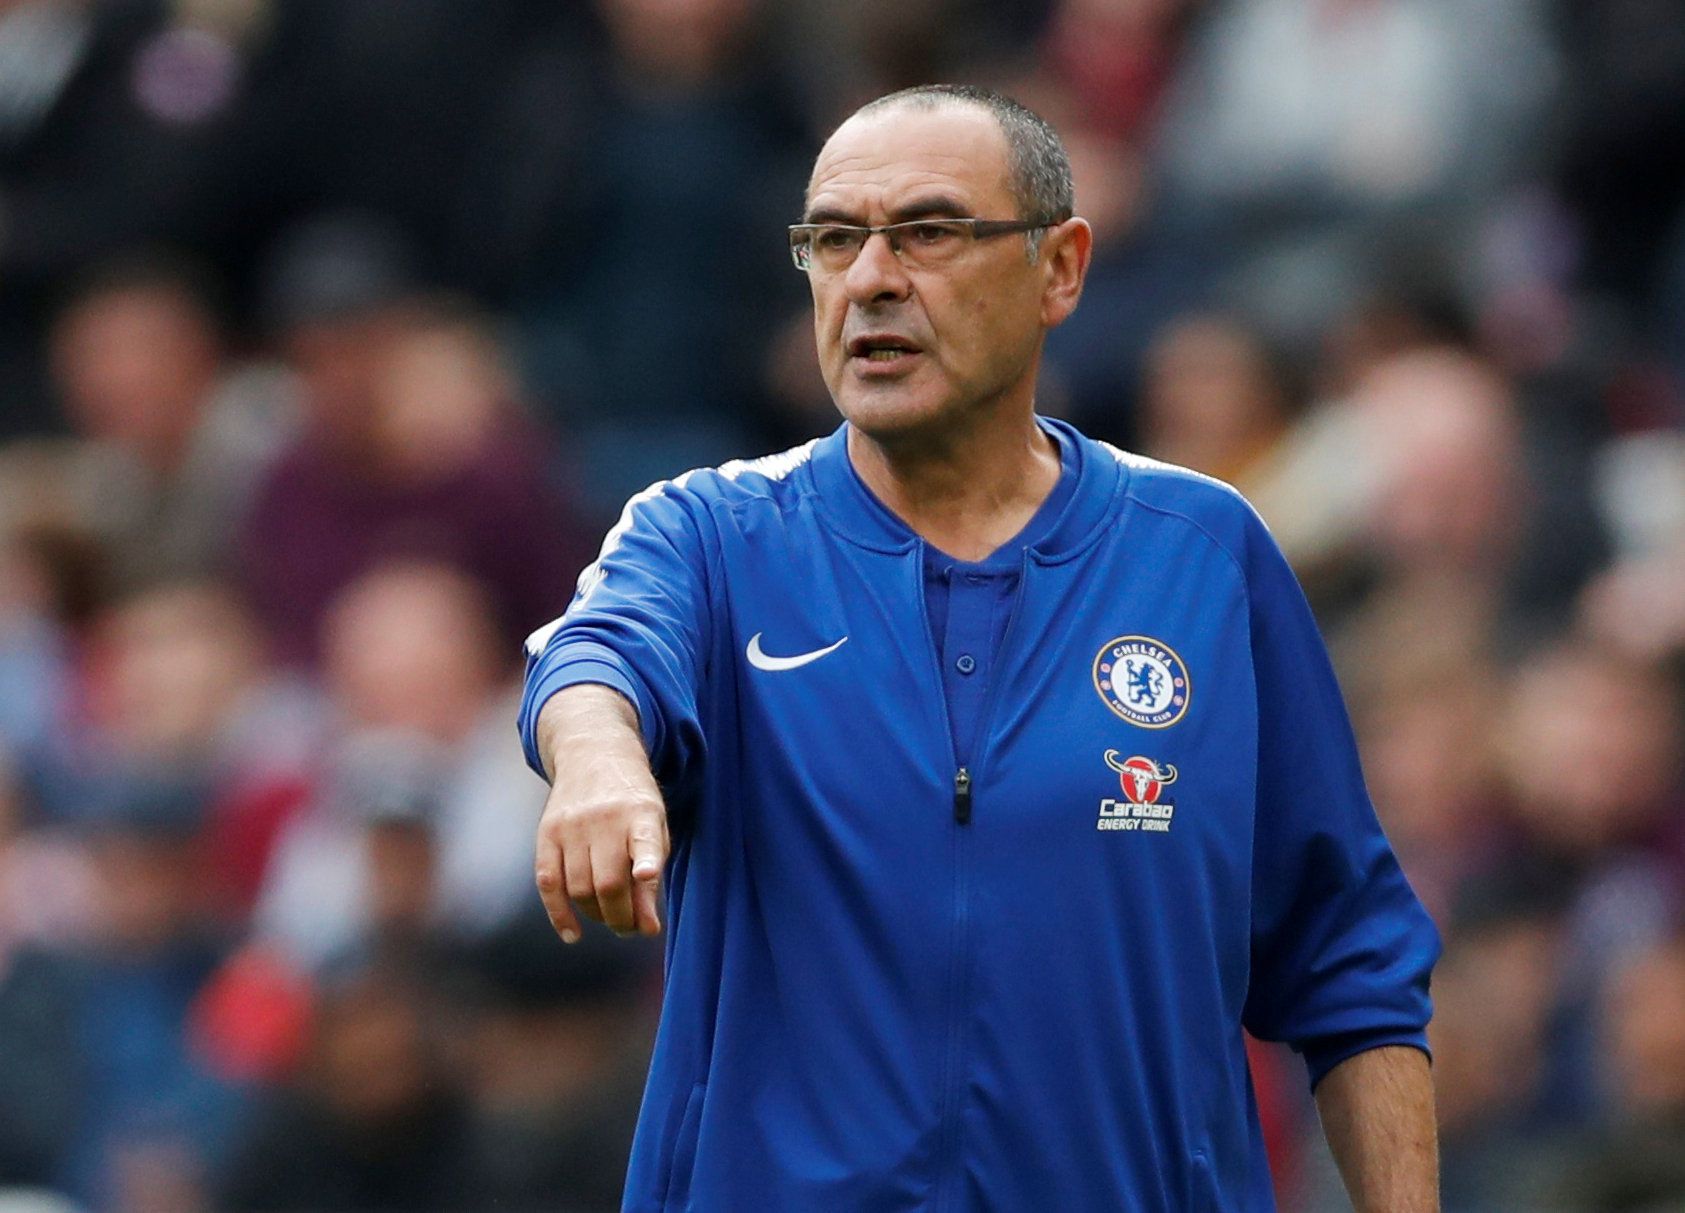 Soccer Football - Premier League - West Ham United v Chelsea - London Stadium, London, Britain - September 23, 2018  Chelsea manager Maurizio Sarri gestures during the match     Action Images via Reuters/Matthew Childs  EDITORIAL USE ONLY. No use with unauthorized audio, video, data, fixture lists, club/league logos or "live" services. Online in-match use limited to 75 images, no video emulation. No use in betting, games or single club/league/player publications.  Please contact your account rep